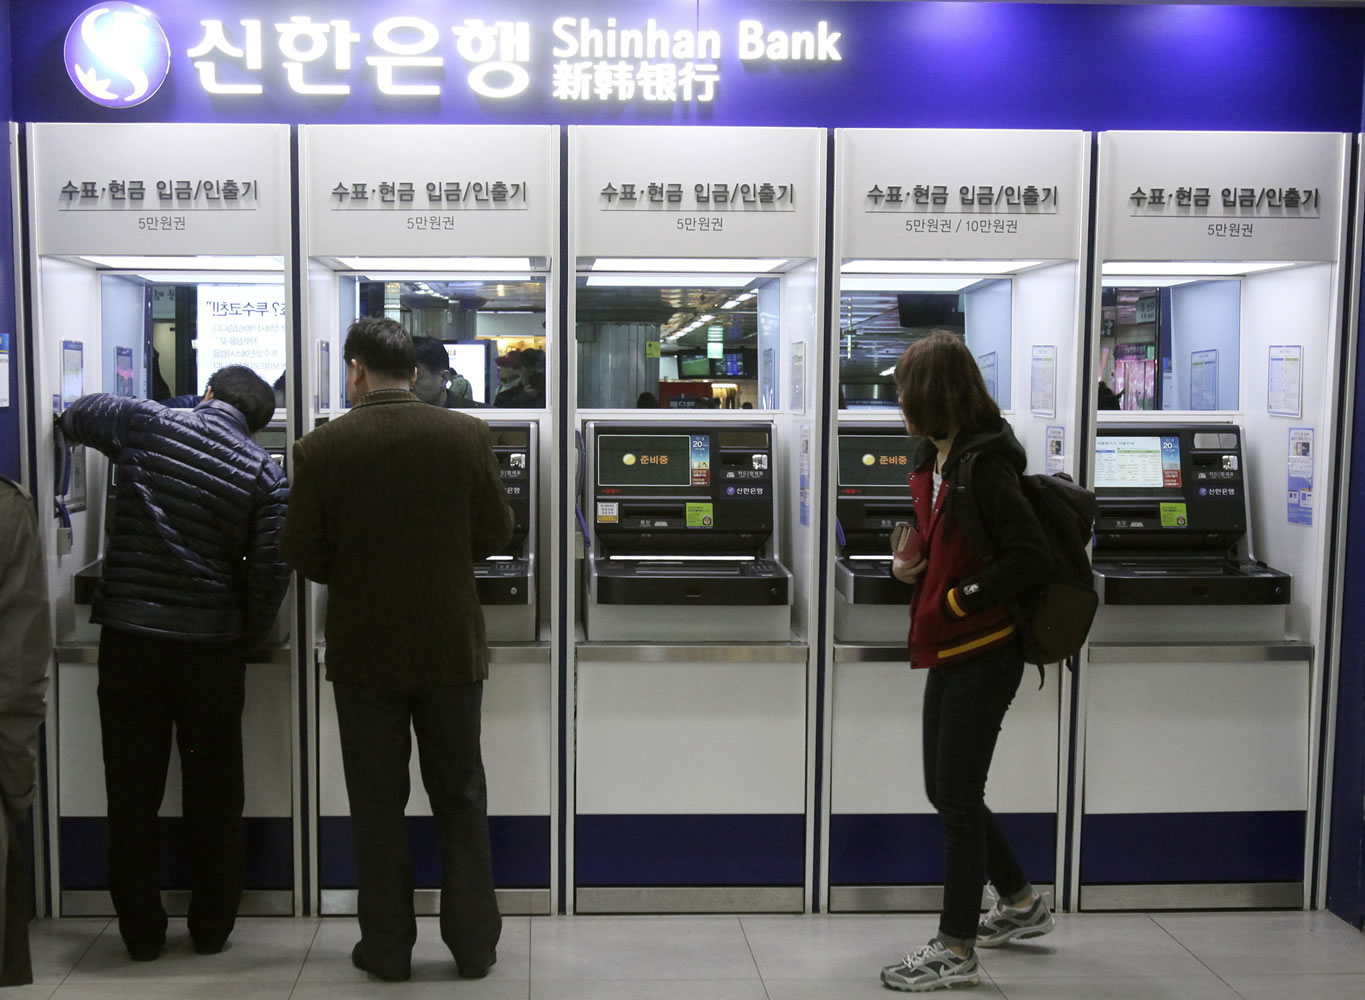 Depositors try to use automated teller machines at Shinhan Bank while the bank's computer networks are paralyzed at a subway station in Seoul, South Korea, on Wednesday.